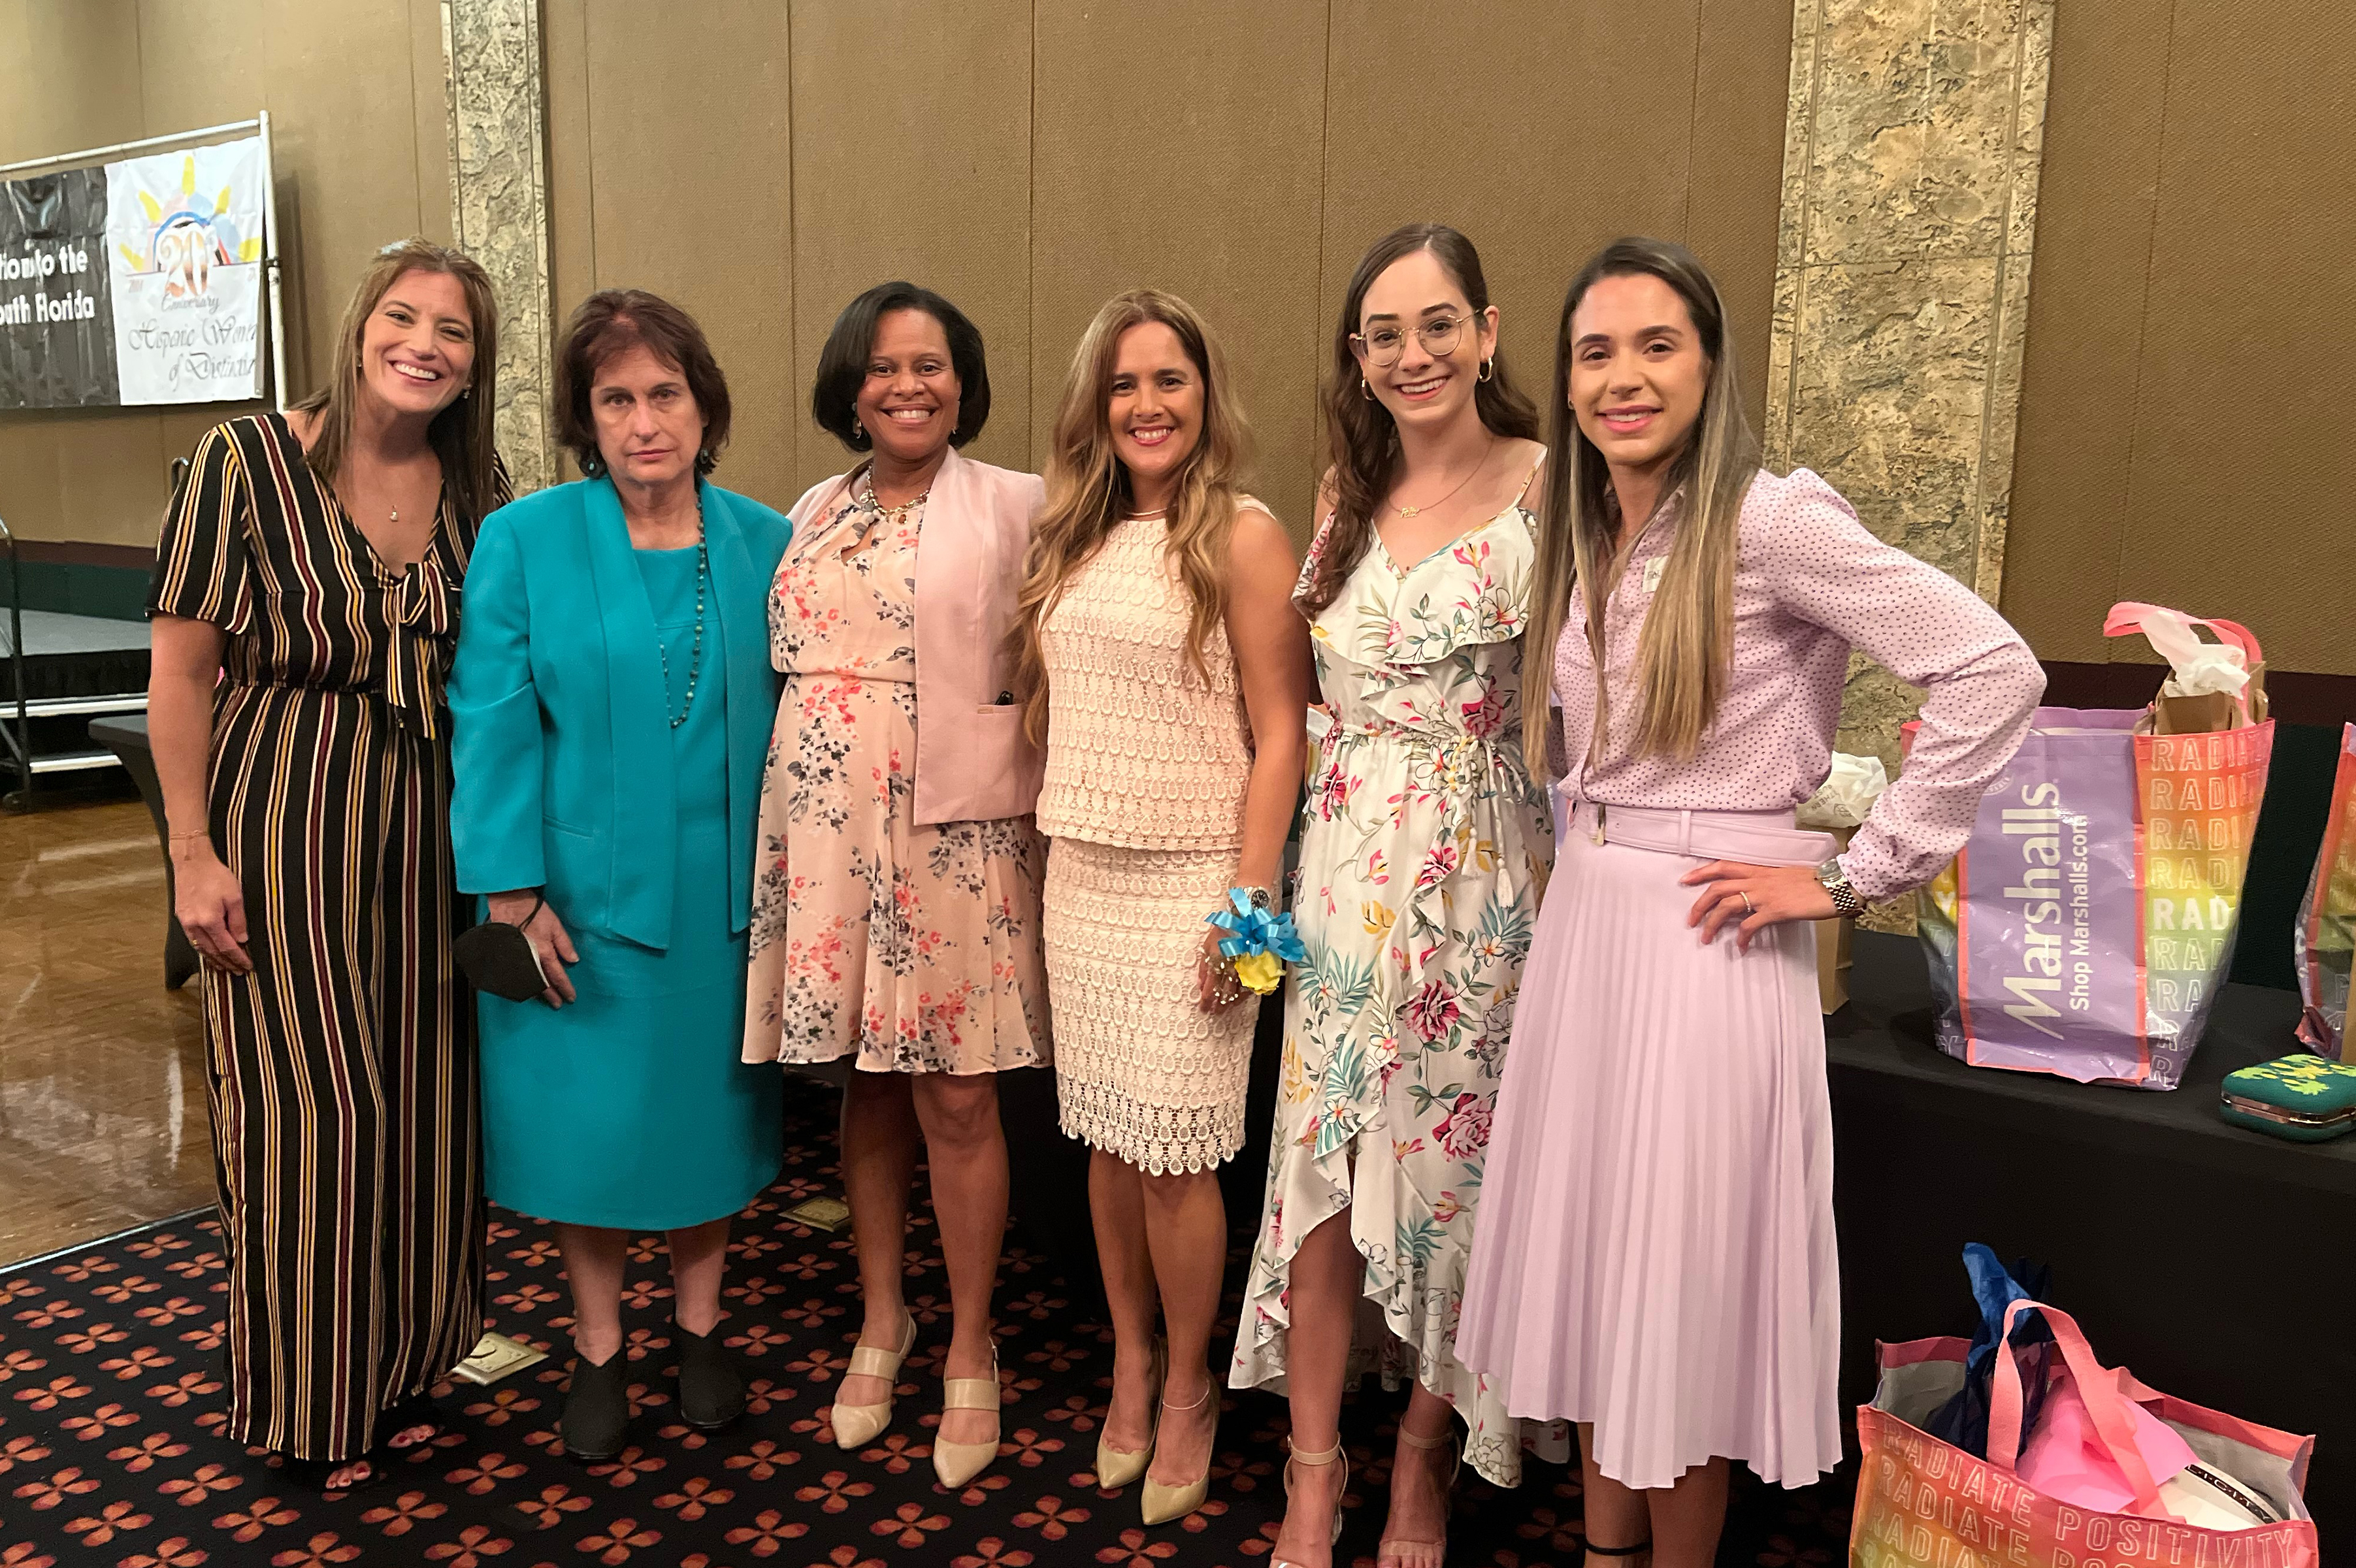 Sigal Rubin, Criminal Justice instructor; Dr. Michele Hawkins, interim provost and social work professor; Dr. Safiya George, dean of the Christine E. Lynn College of Nursing; Dean Naelys Luna; Alexandria Ayala, fellow 2022 honoree; and Camila Mychalczuk, director of state relations for Florida Atlantic